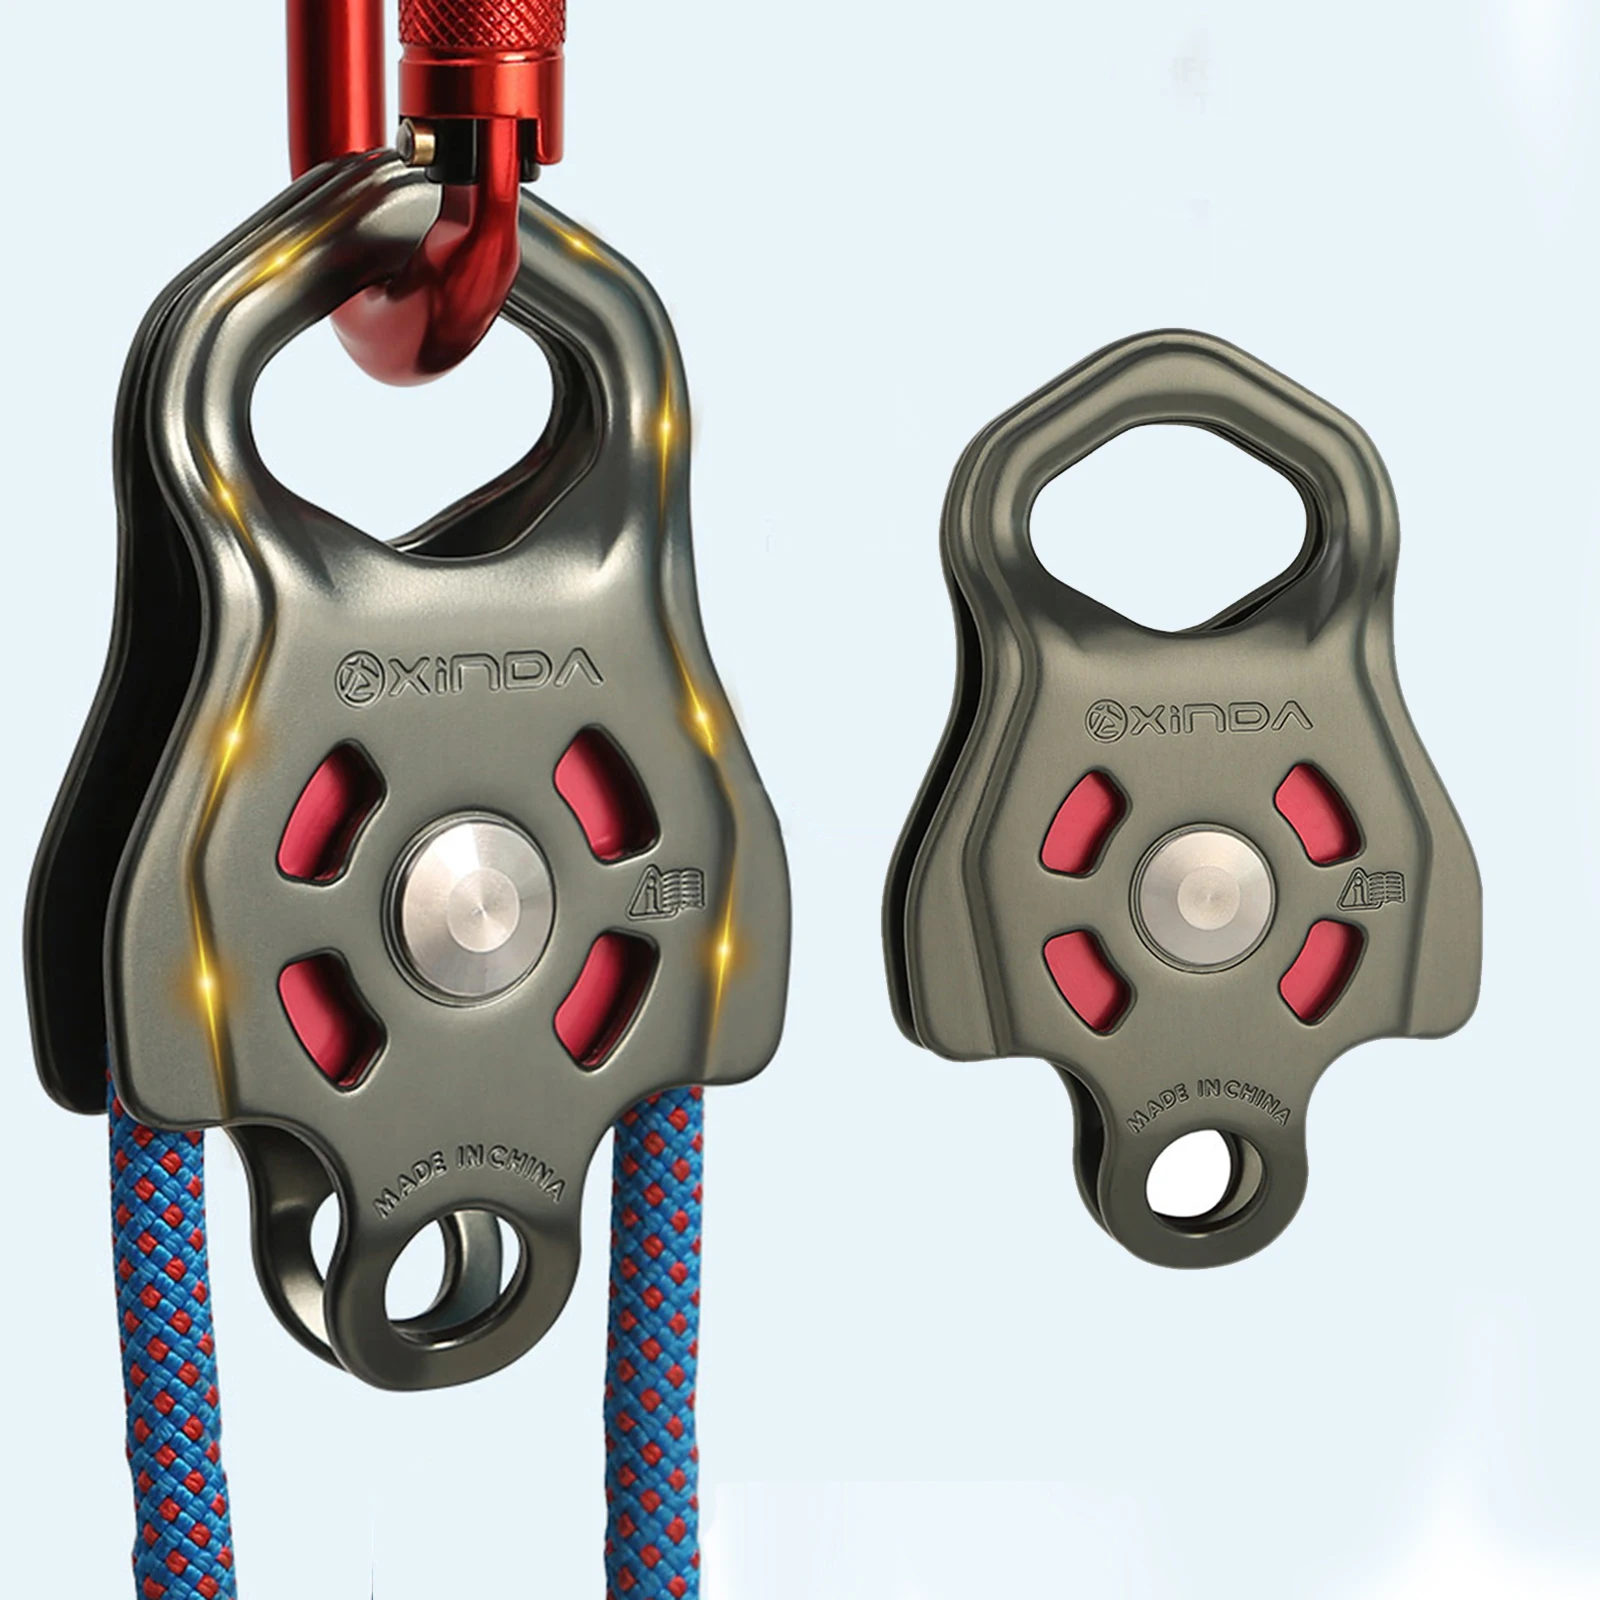 Professional Small Single Pulley Gear Ball Bearing Mountaineering Rock Climbing  -solving Carriage Pulley